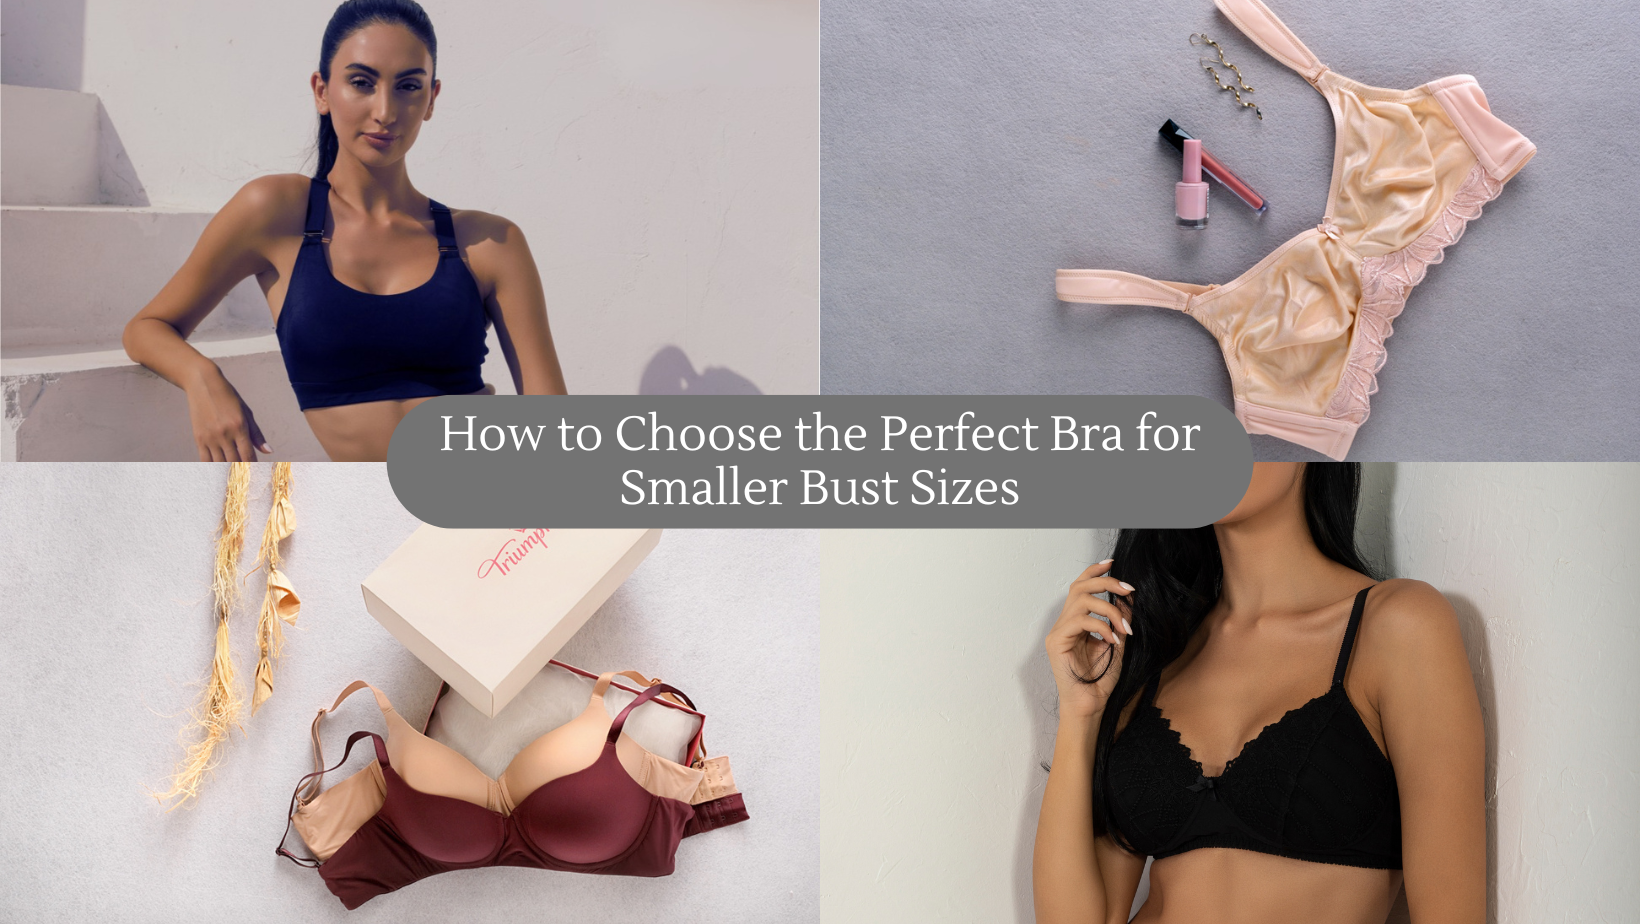 Bra for Smaller Breasts - How to Choose the Bra for Smaller Bust